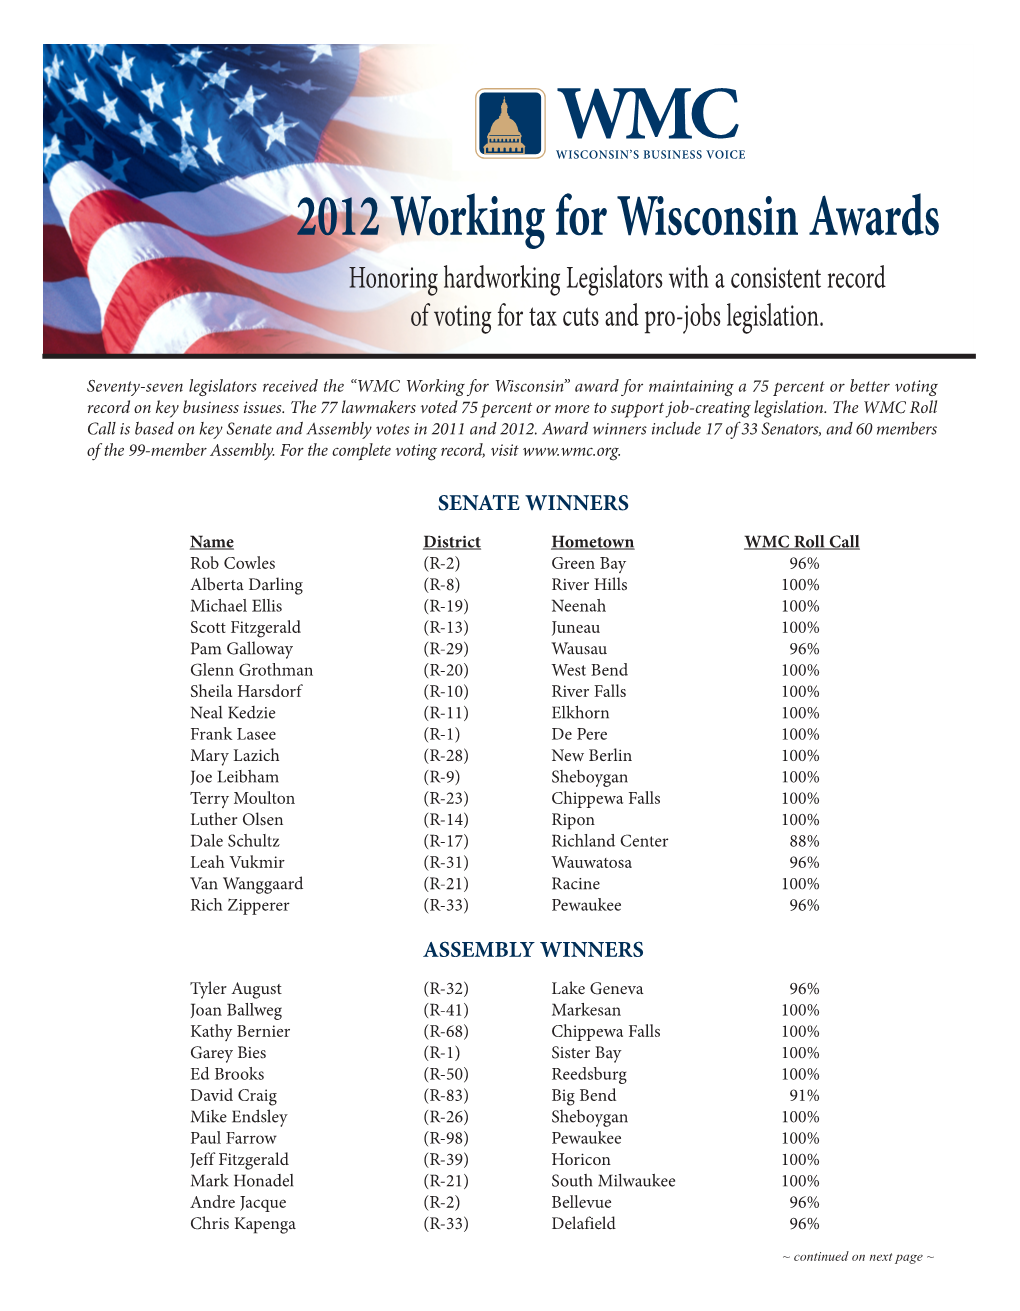 2012 Working for Wisconsin Awards Honoring Hardworking Legislators with a Consistent Record of Voting for Tax Cuts and Pro-Jobs Legislation